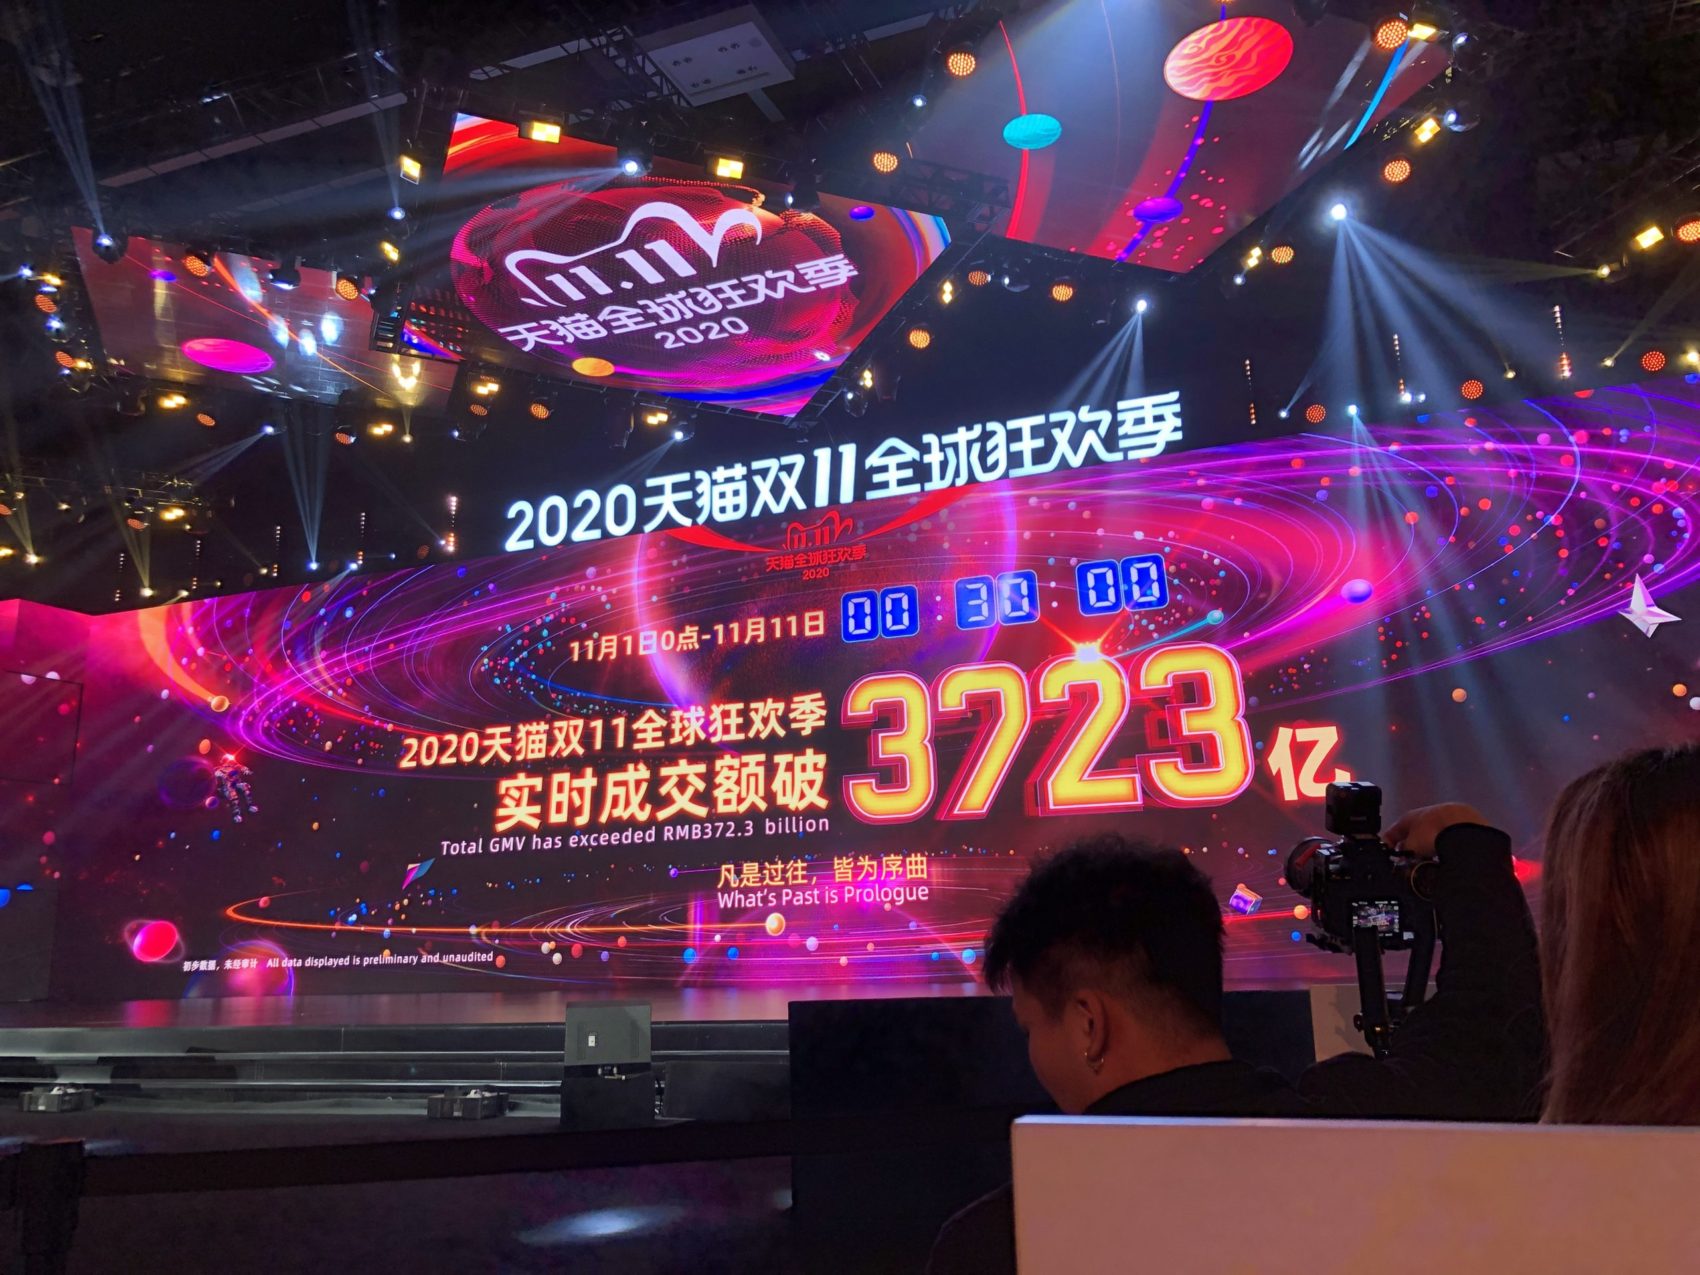 Singles Day China 2020 - Record breaking